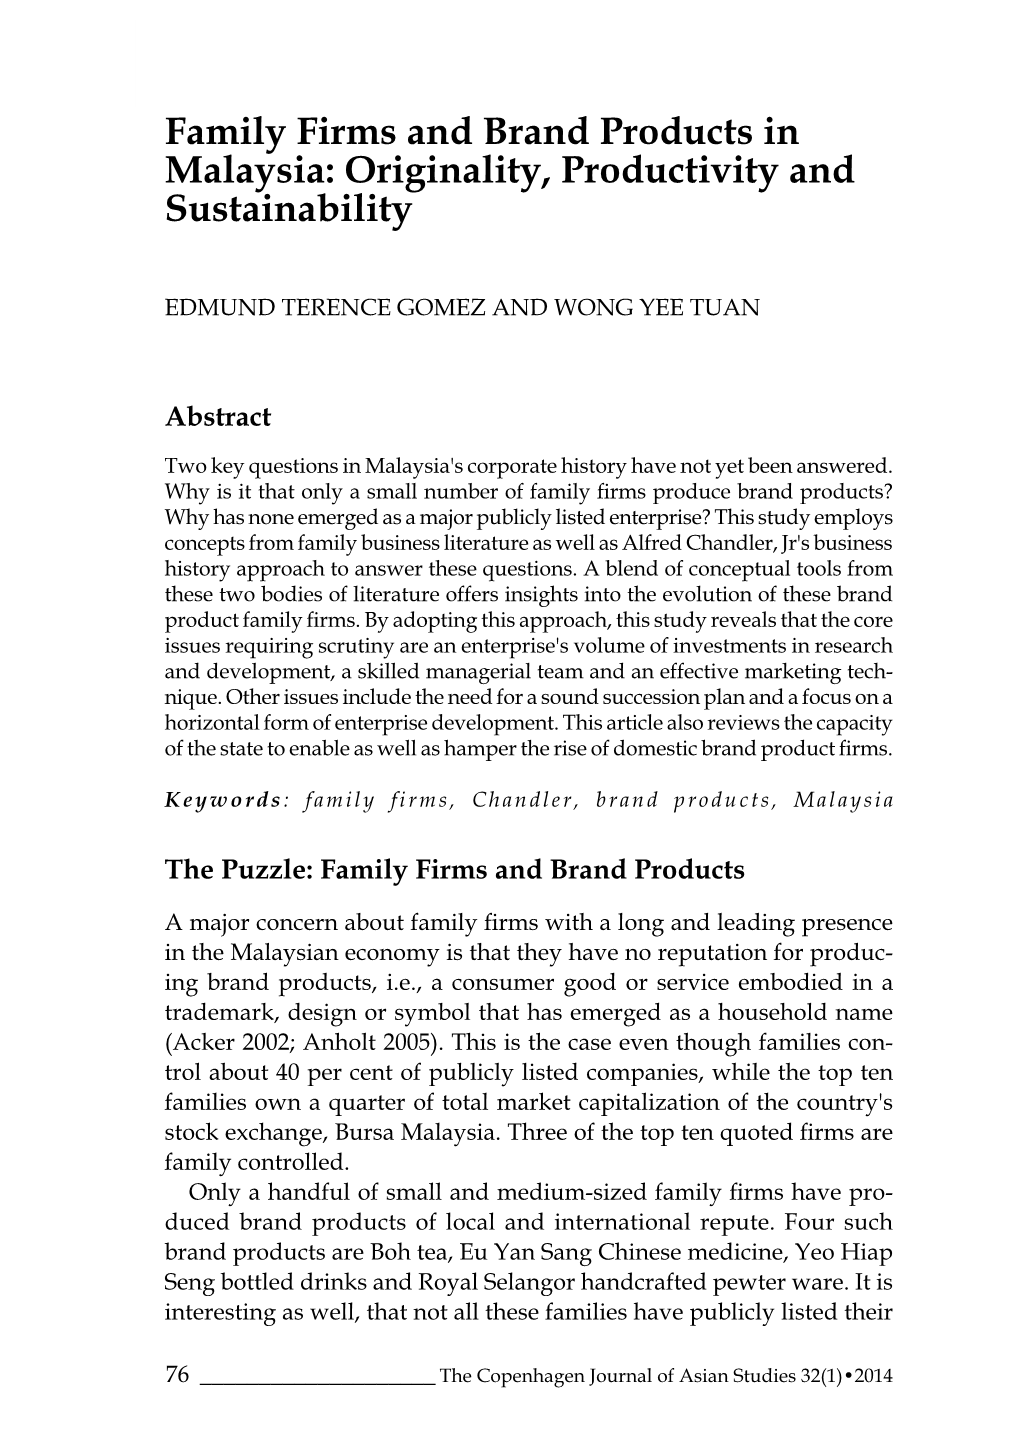 Family Firms and Brand Products in Malaysia: Originality, Productivity and Sustainability